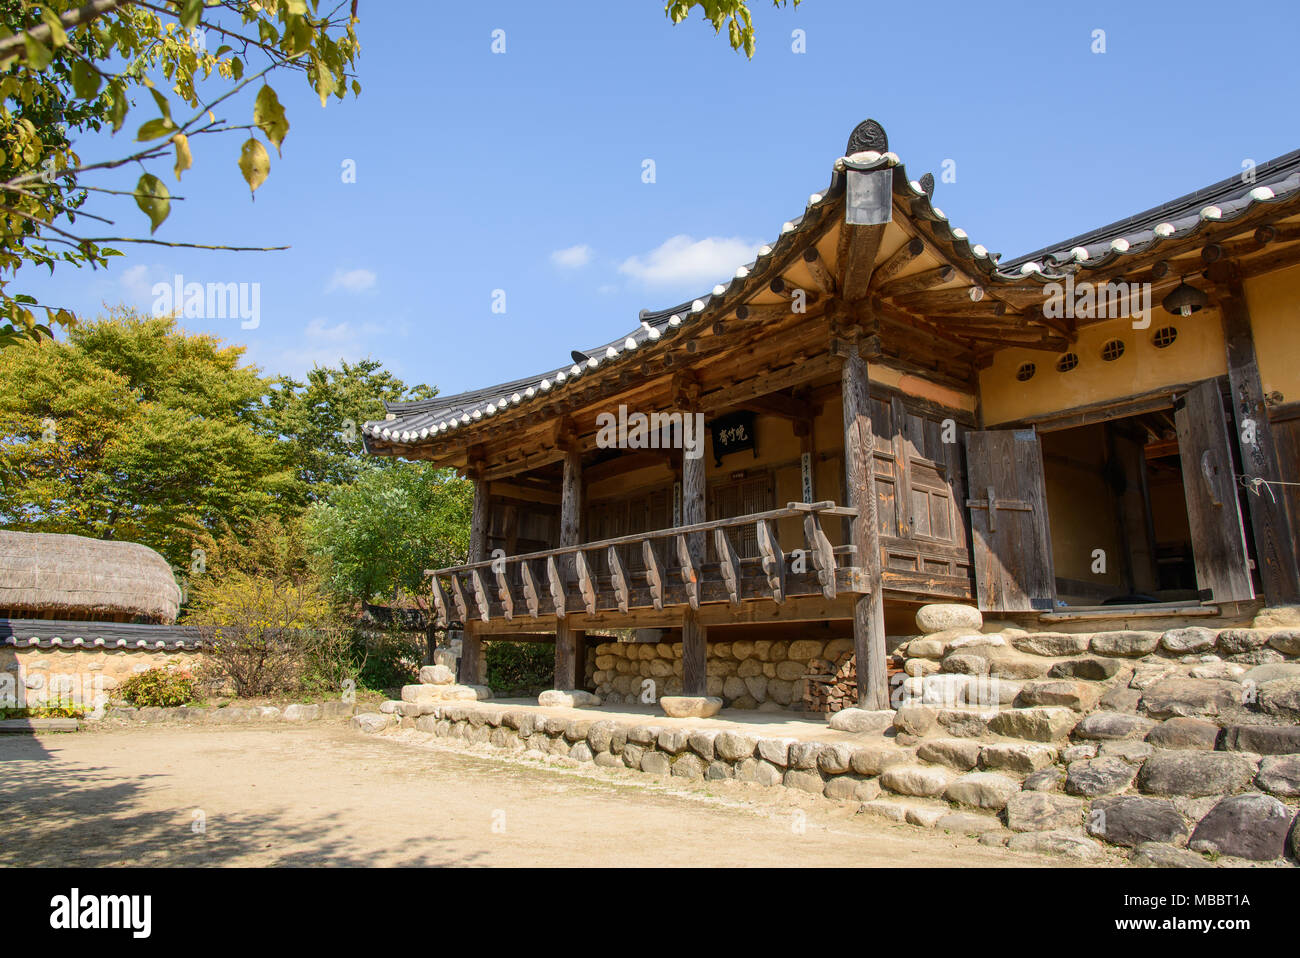 YEONGJU, KOREA - OCTOBER 15, 2014: Whole view of the old house 'Manjukjae' in Seonbichon traditional village. Stock Photo